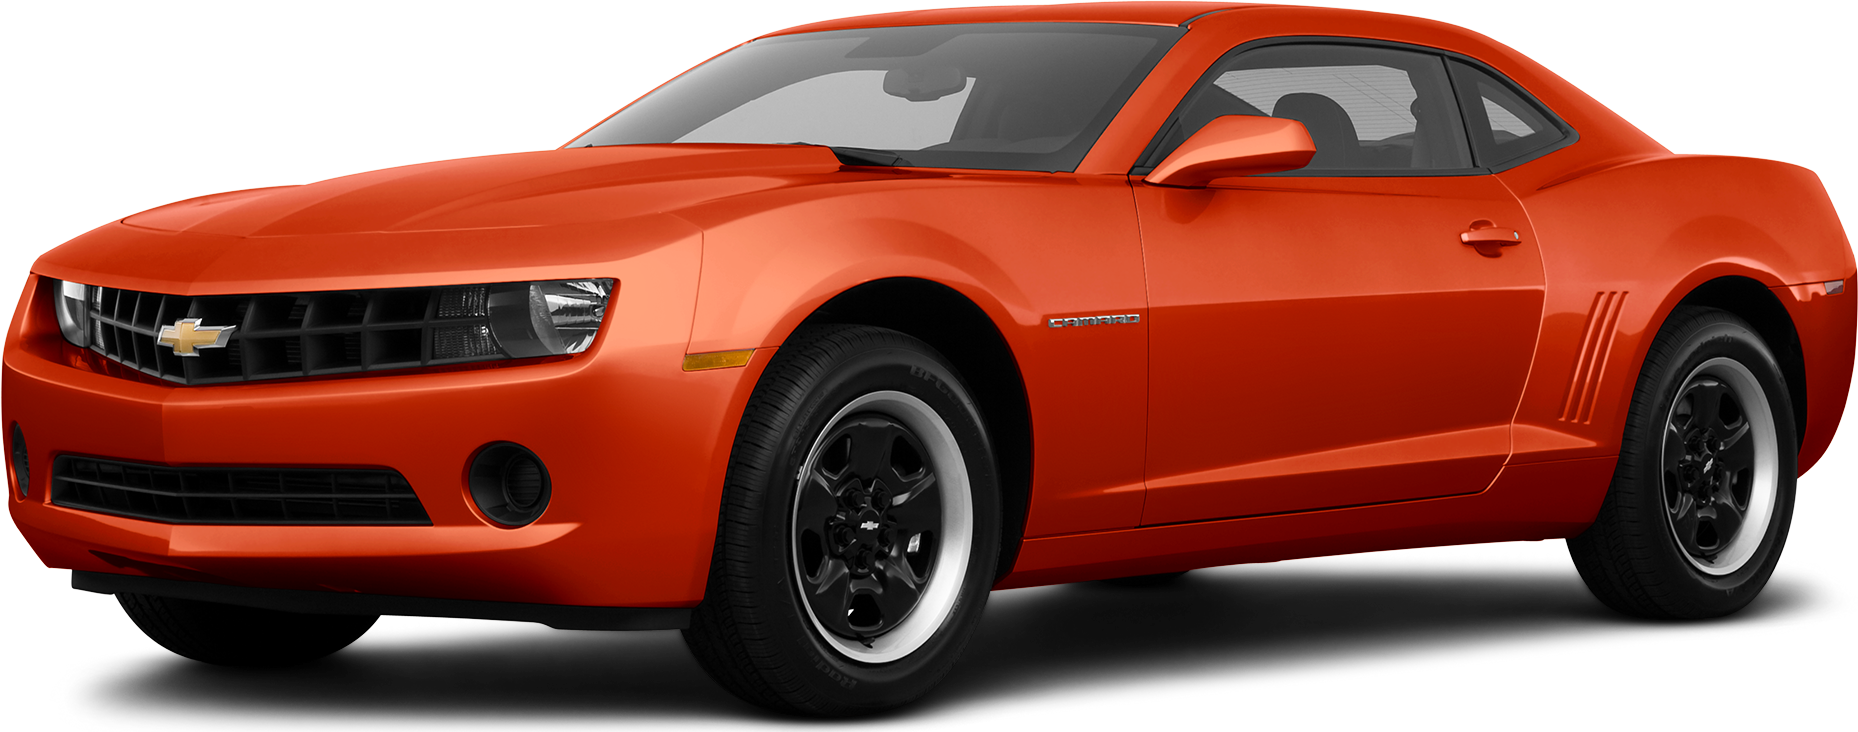 2010 Chevrolet Camaro Values Cars For Sale Kelley Blue Book